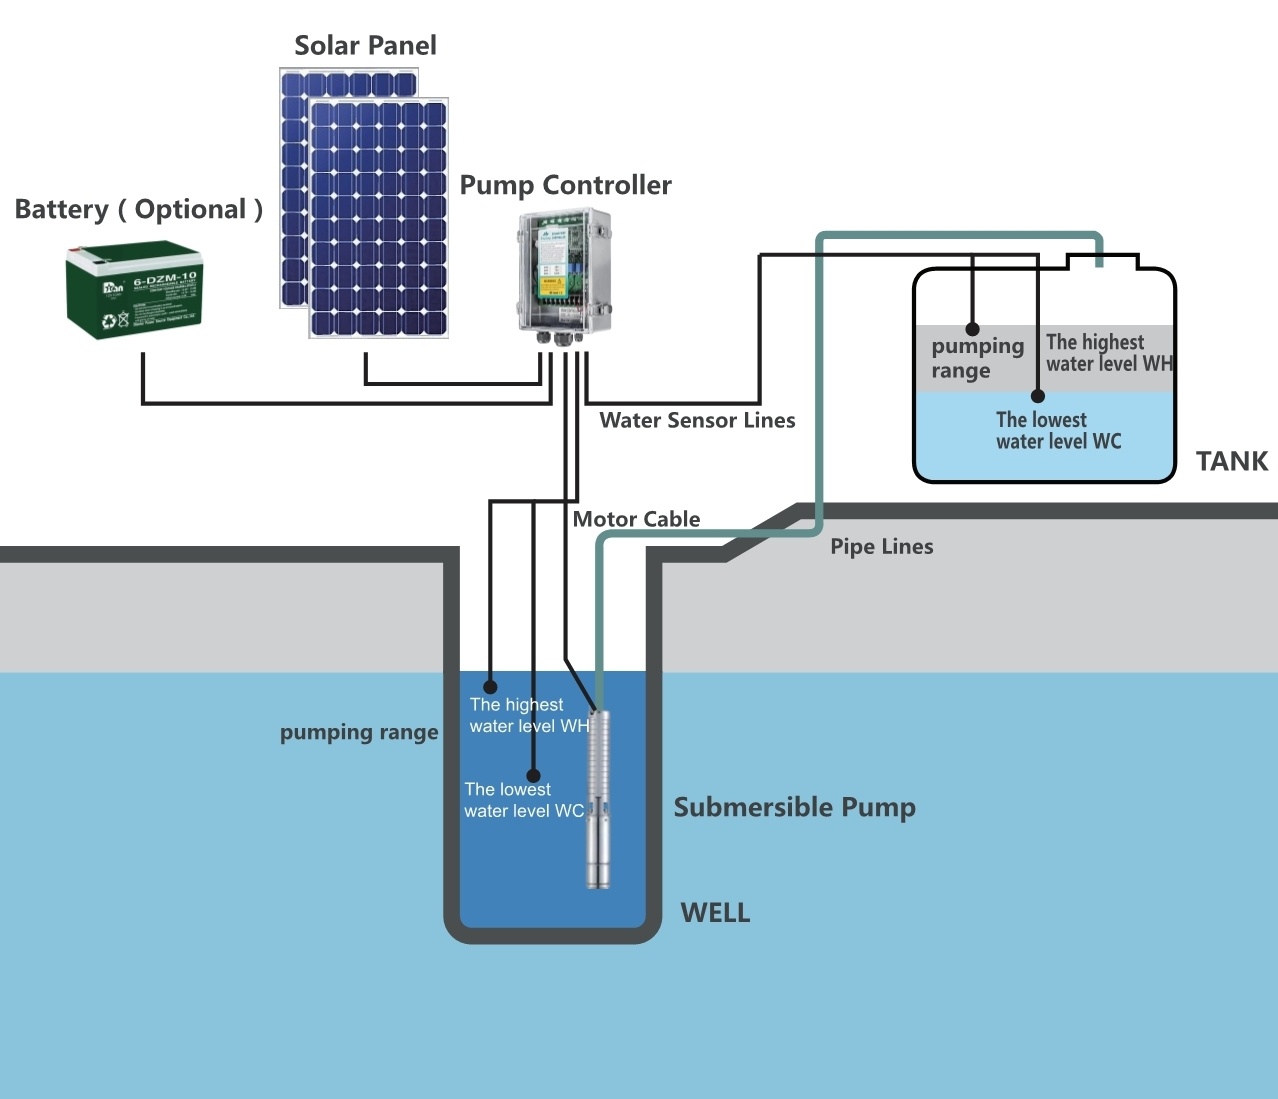 How to Select & Calculate the Proper Batteries for Rison Solar Pumping System ？